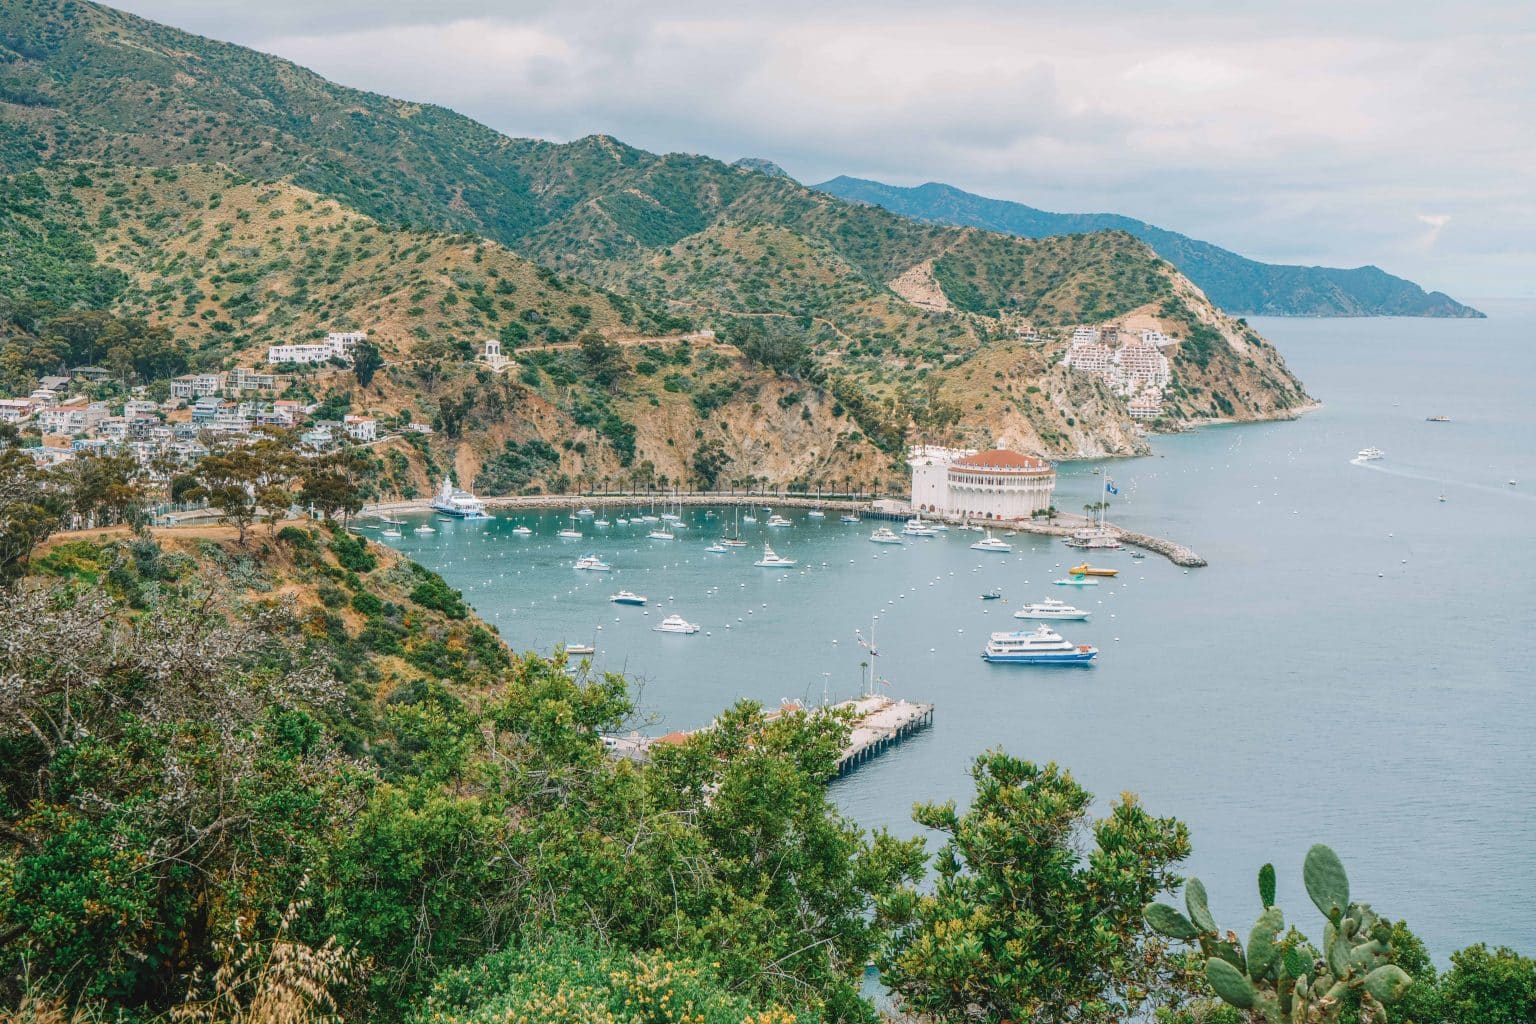 day trip to catalina island from los angeles